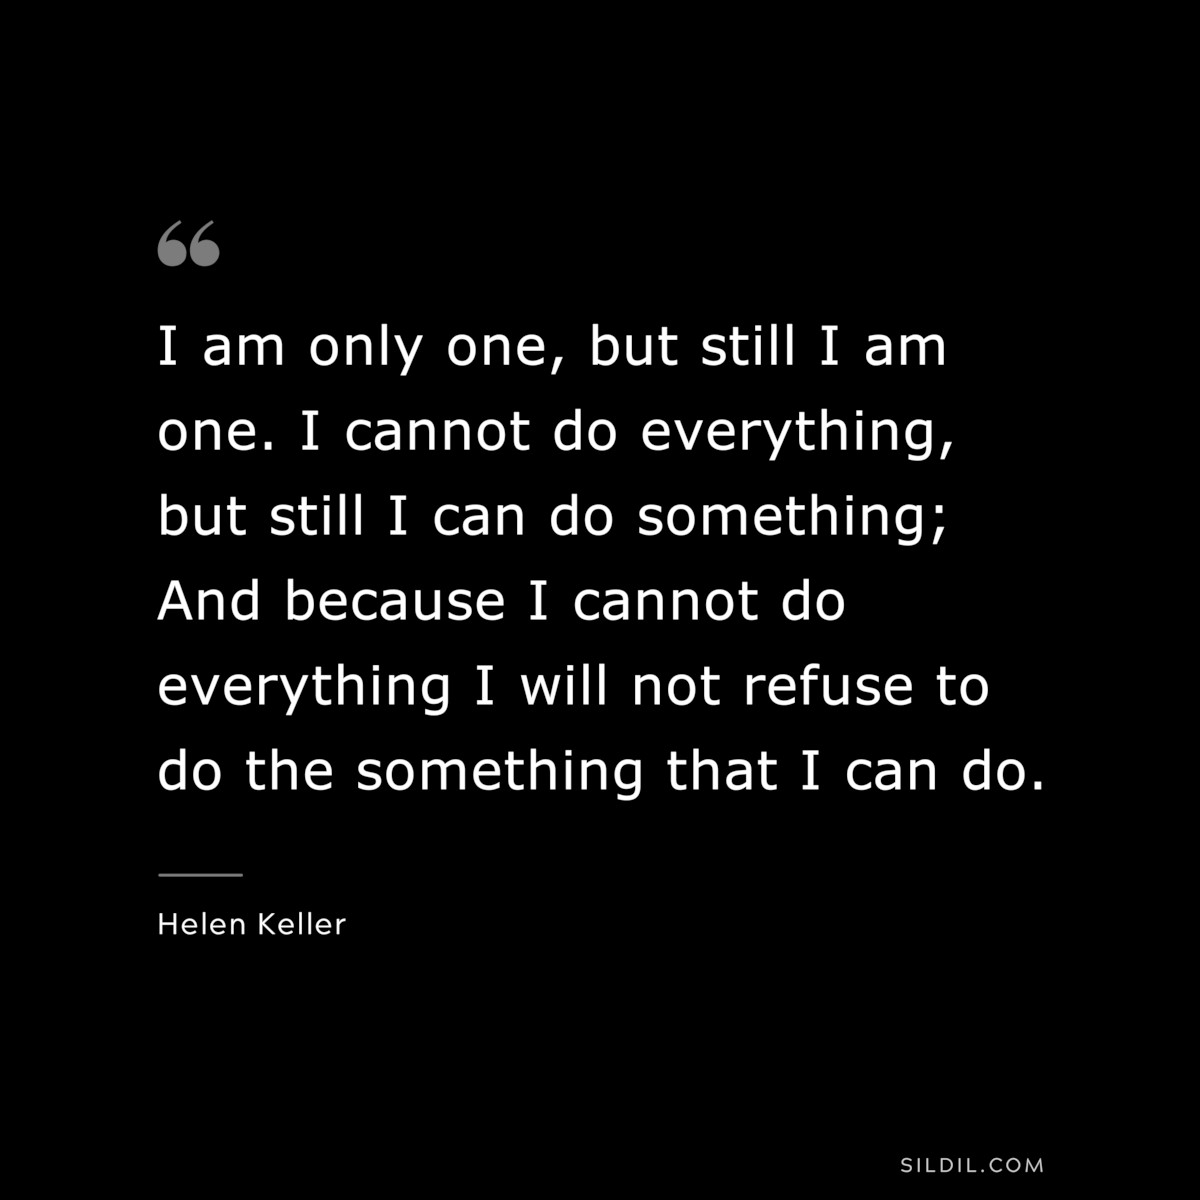 I am only one, but still I am one. I cannot do everything, but still I can do something; And because I cannot do everything I will not refuse to do the something that I can do. ― Helen Keller